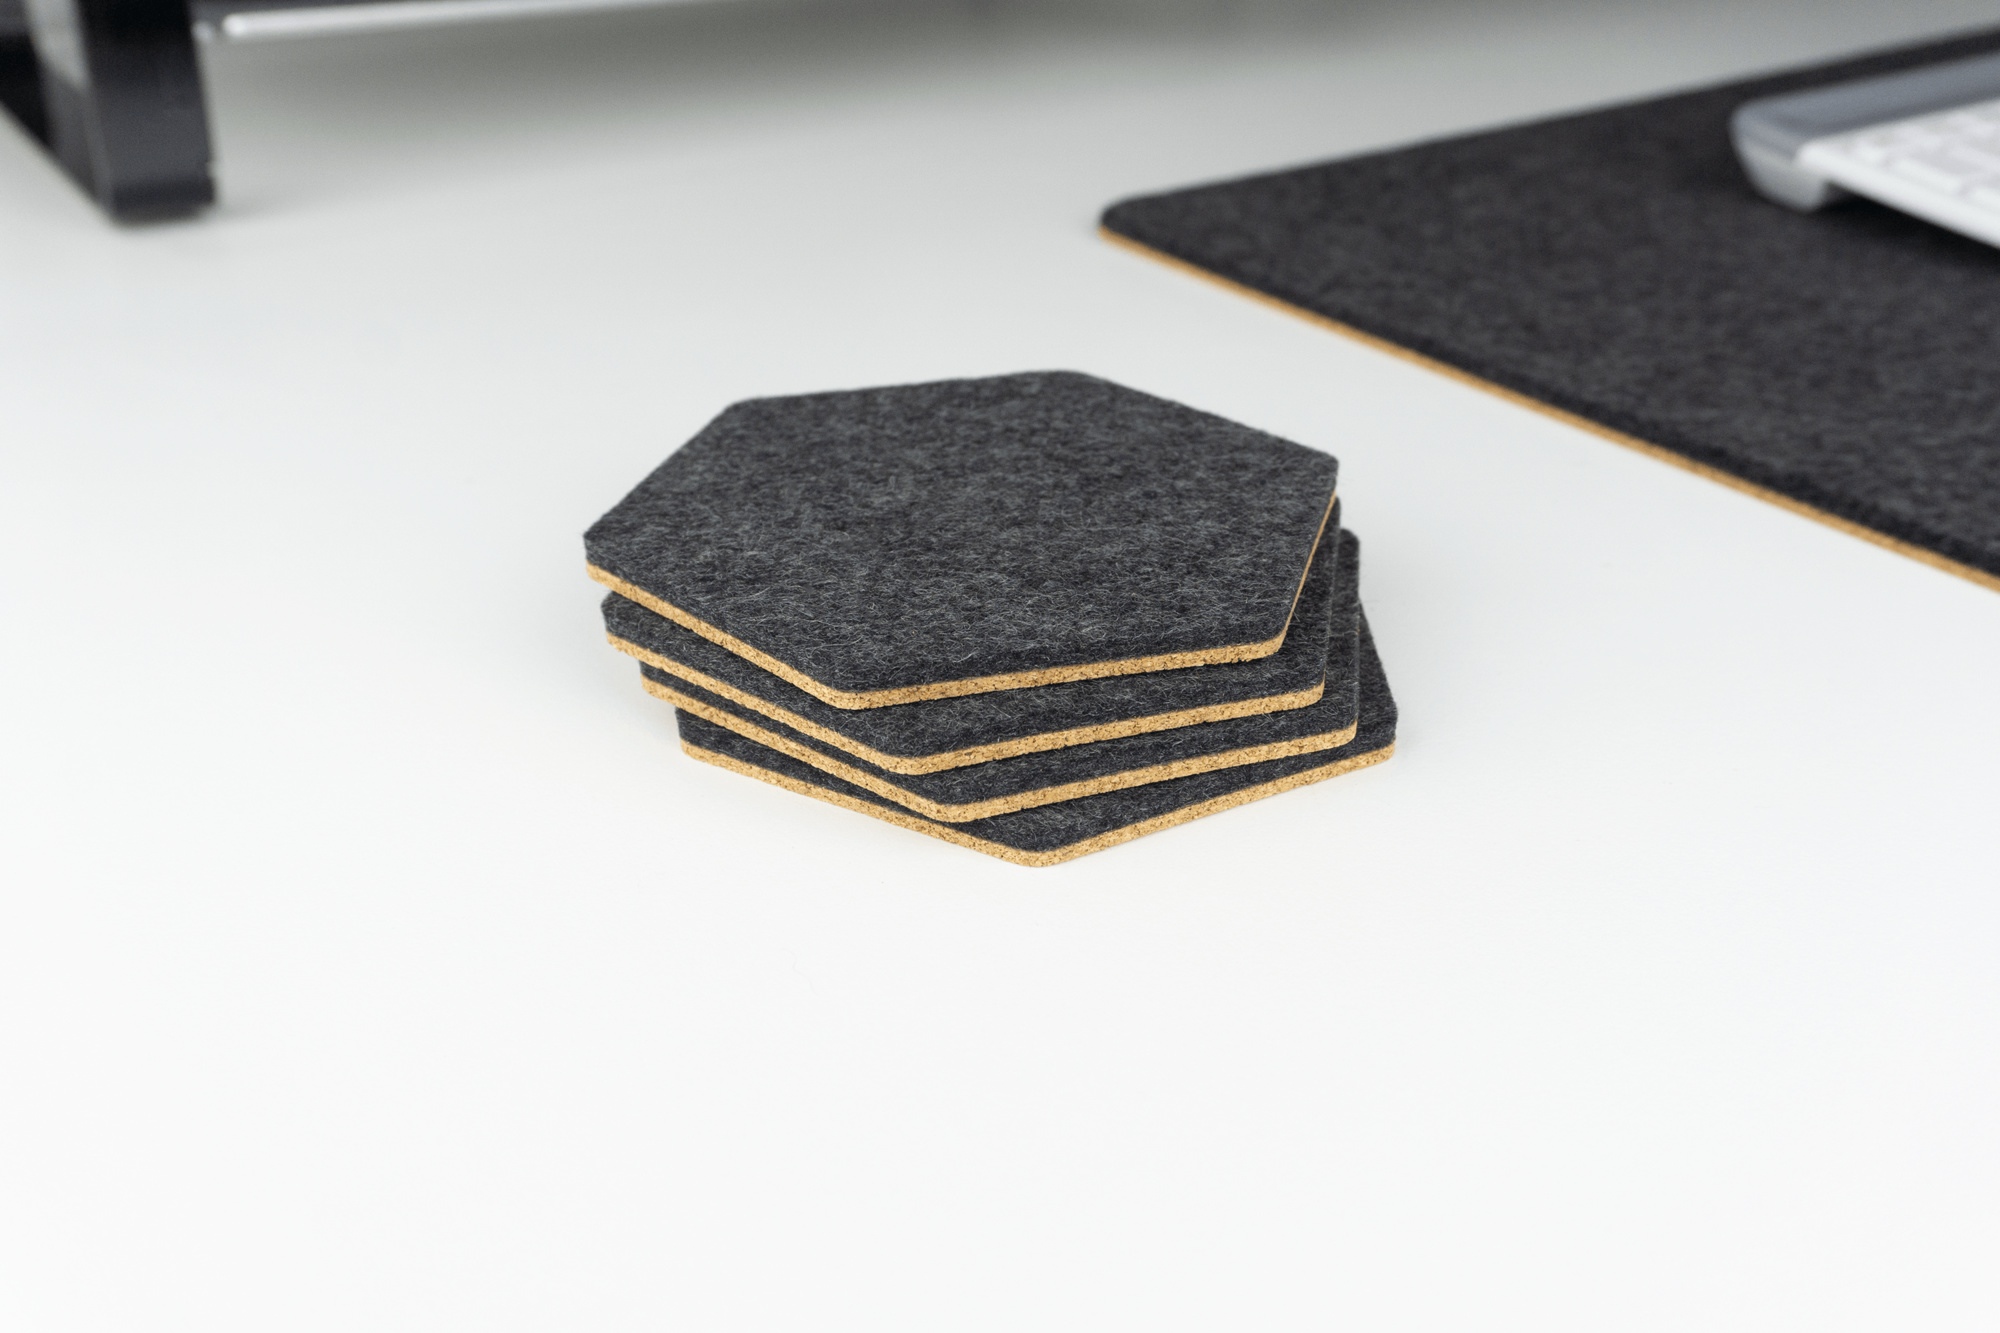 A set of 4 hexagonal desk coasters stacked on a white desk made with black merino wool and cork.